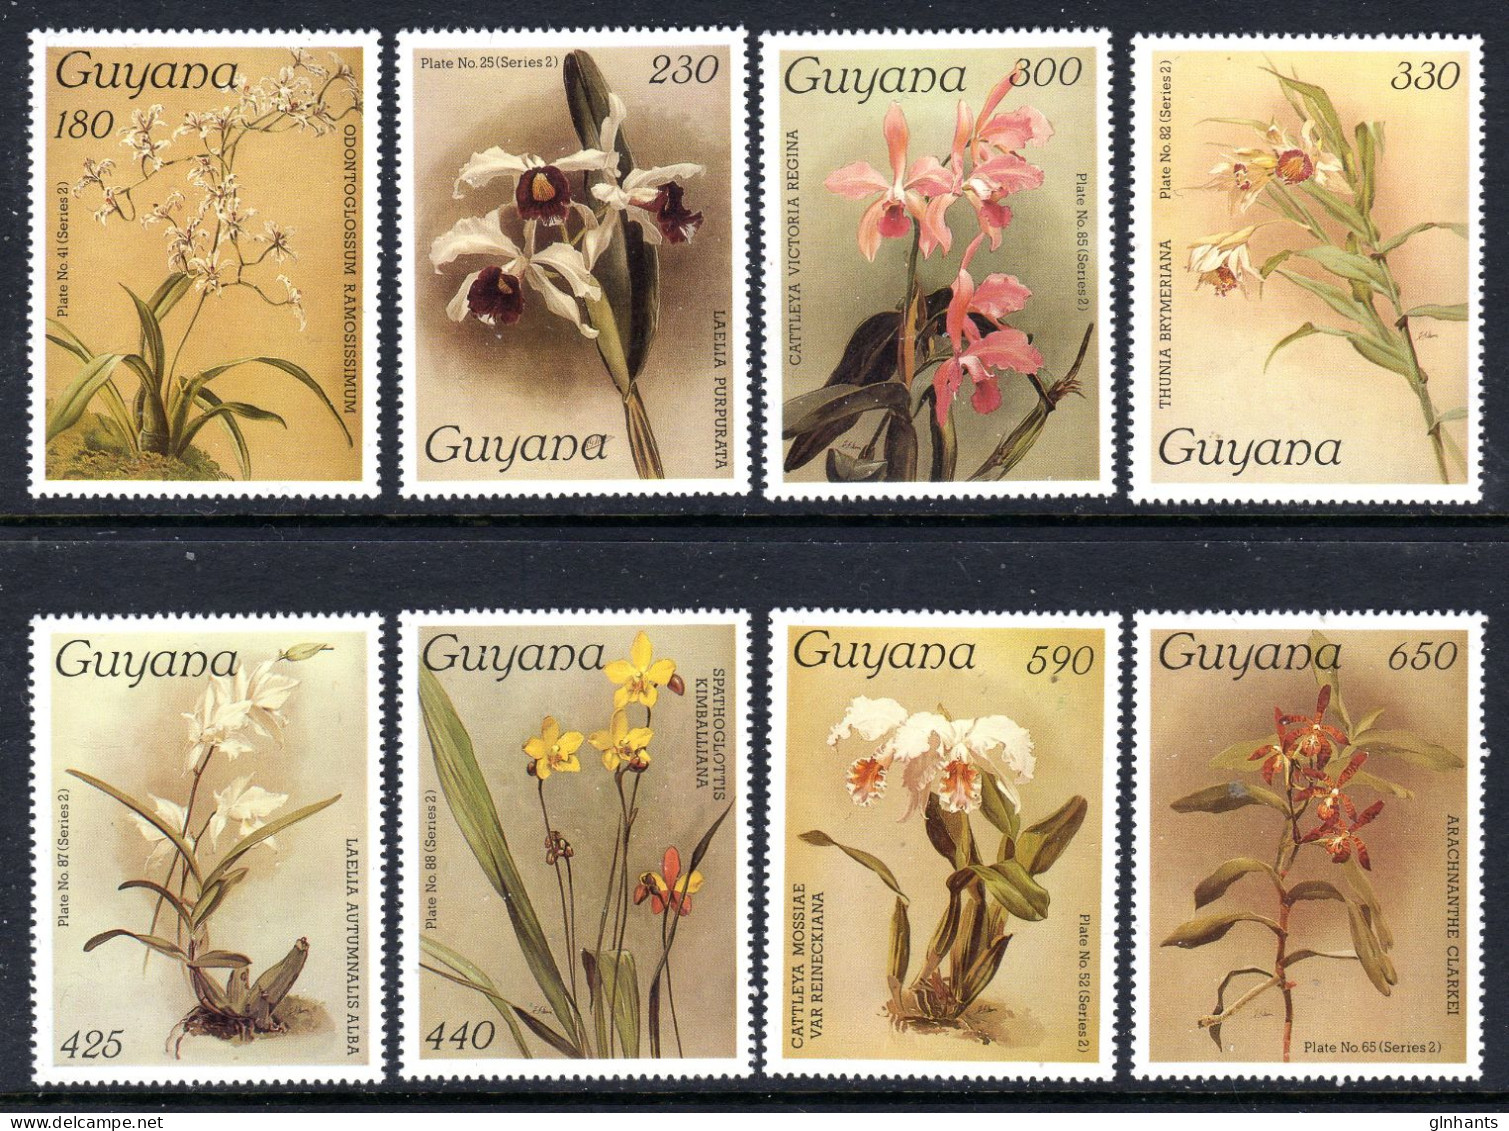 GUYANA - 1987 SANDERS REICHENBACHIA ORCHID FLOWERS 19th ISSUE COMPLETE SET (8V) FINE MNH ** SG 2066-2073 - Guyane (1966-...)